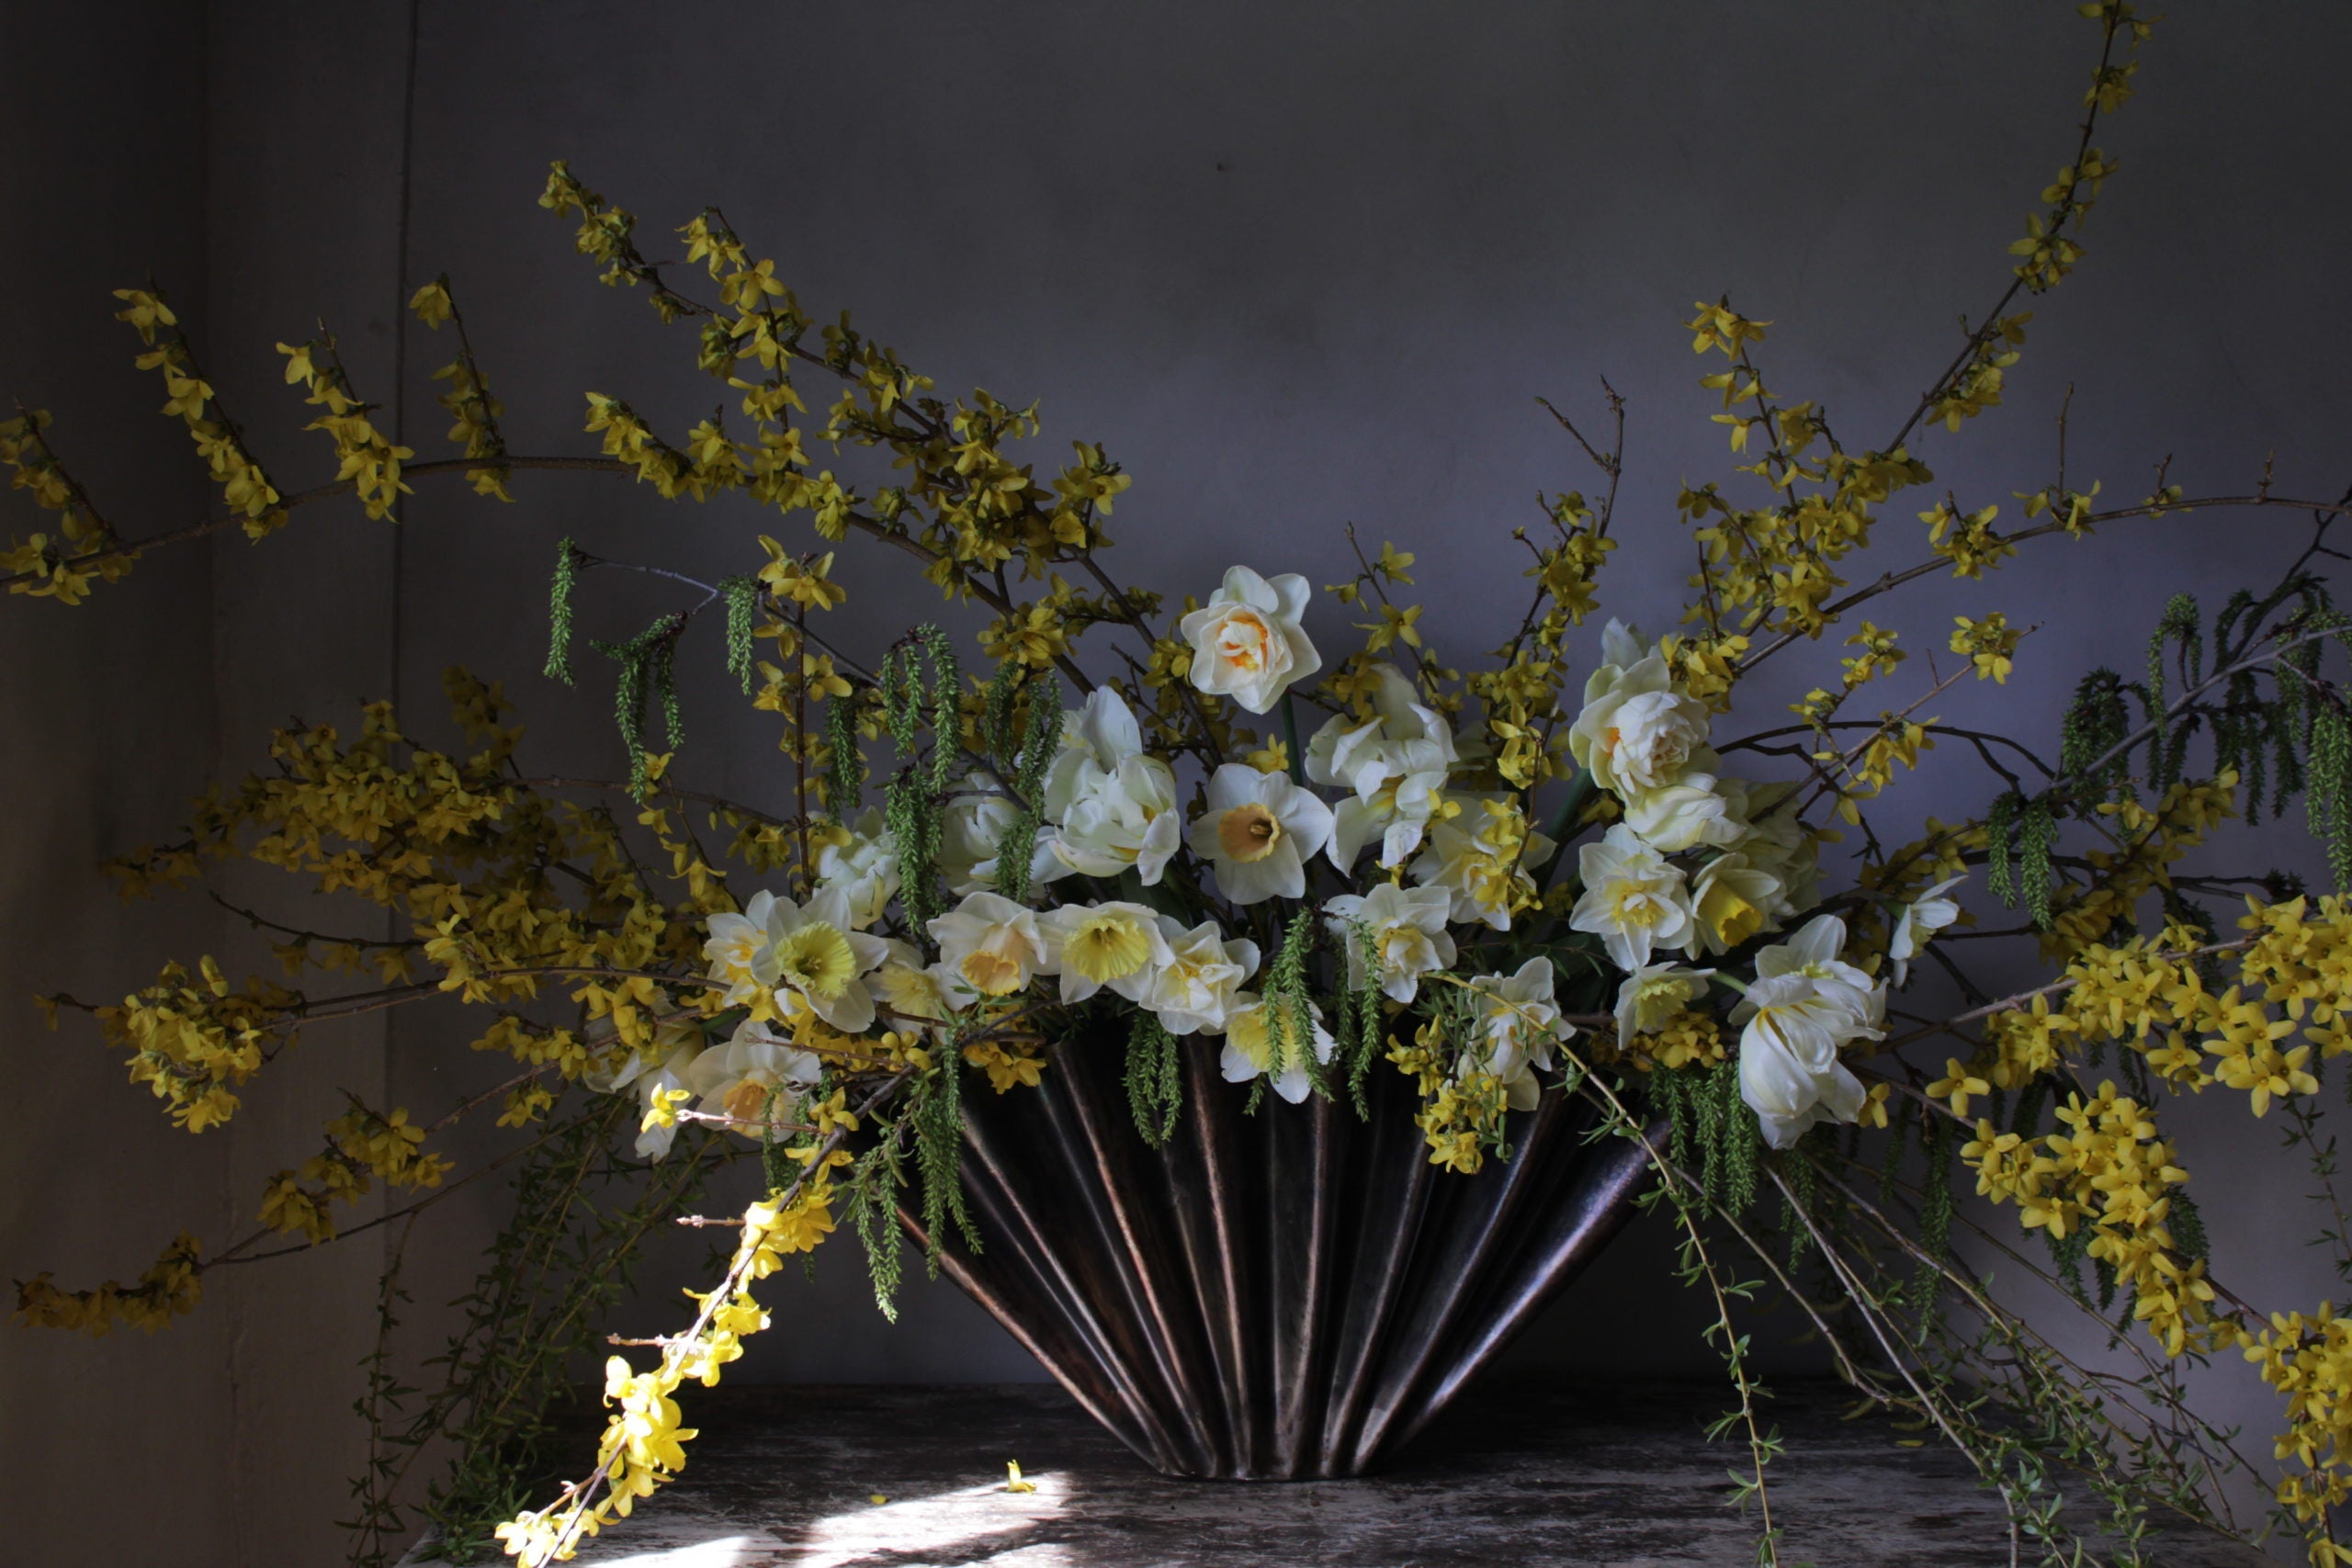 welcoming spring: a guide to arranging florals with Bess Piergrossi